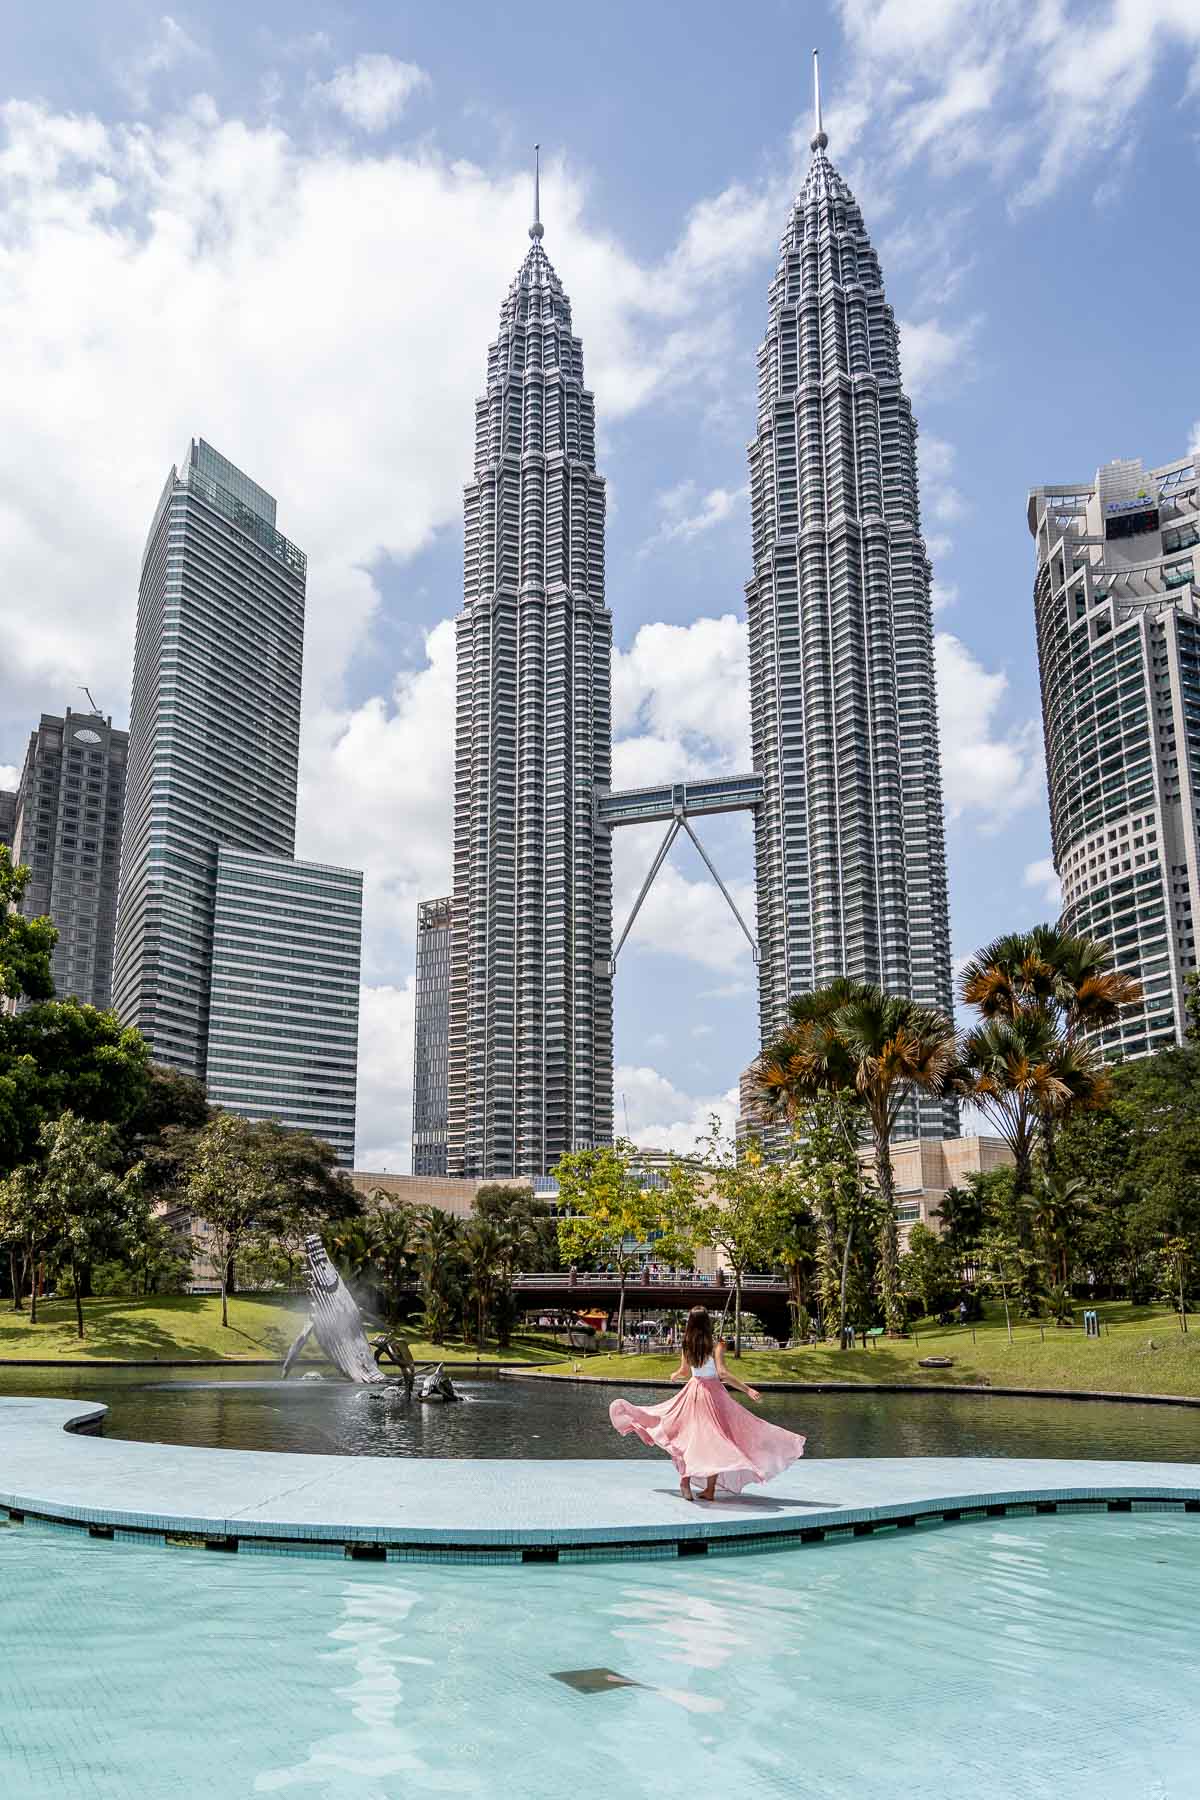 Girl in a pink skirt twirling in front of the Petronas Towers in Kuala Lumpur